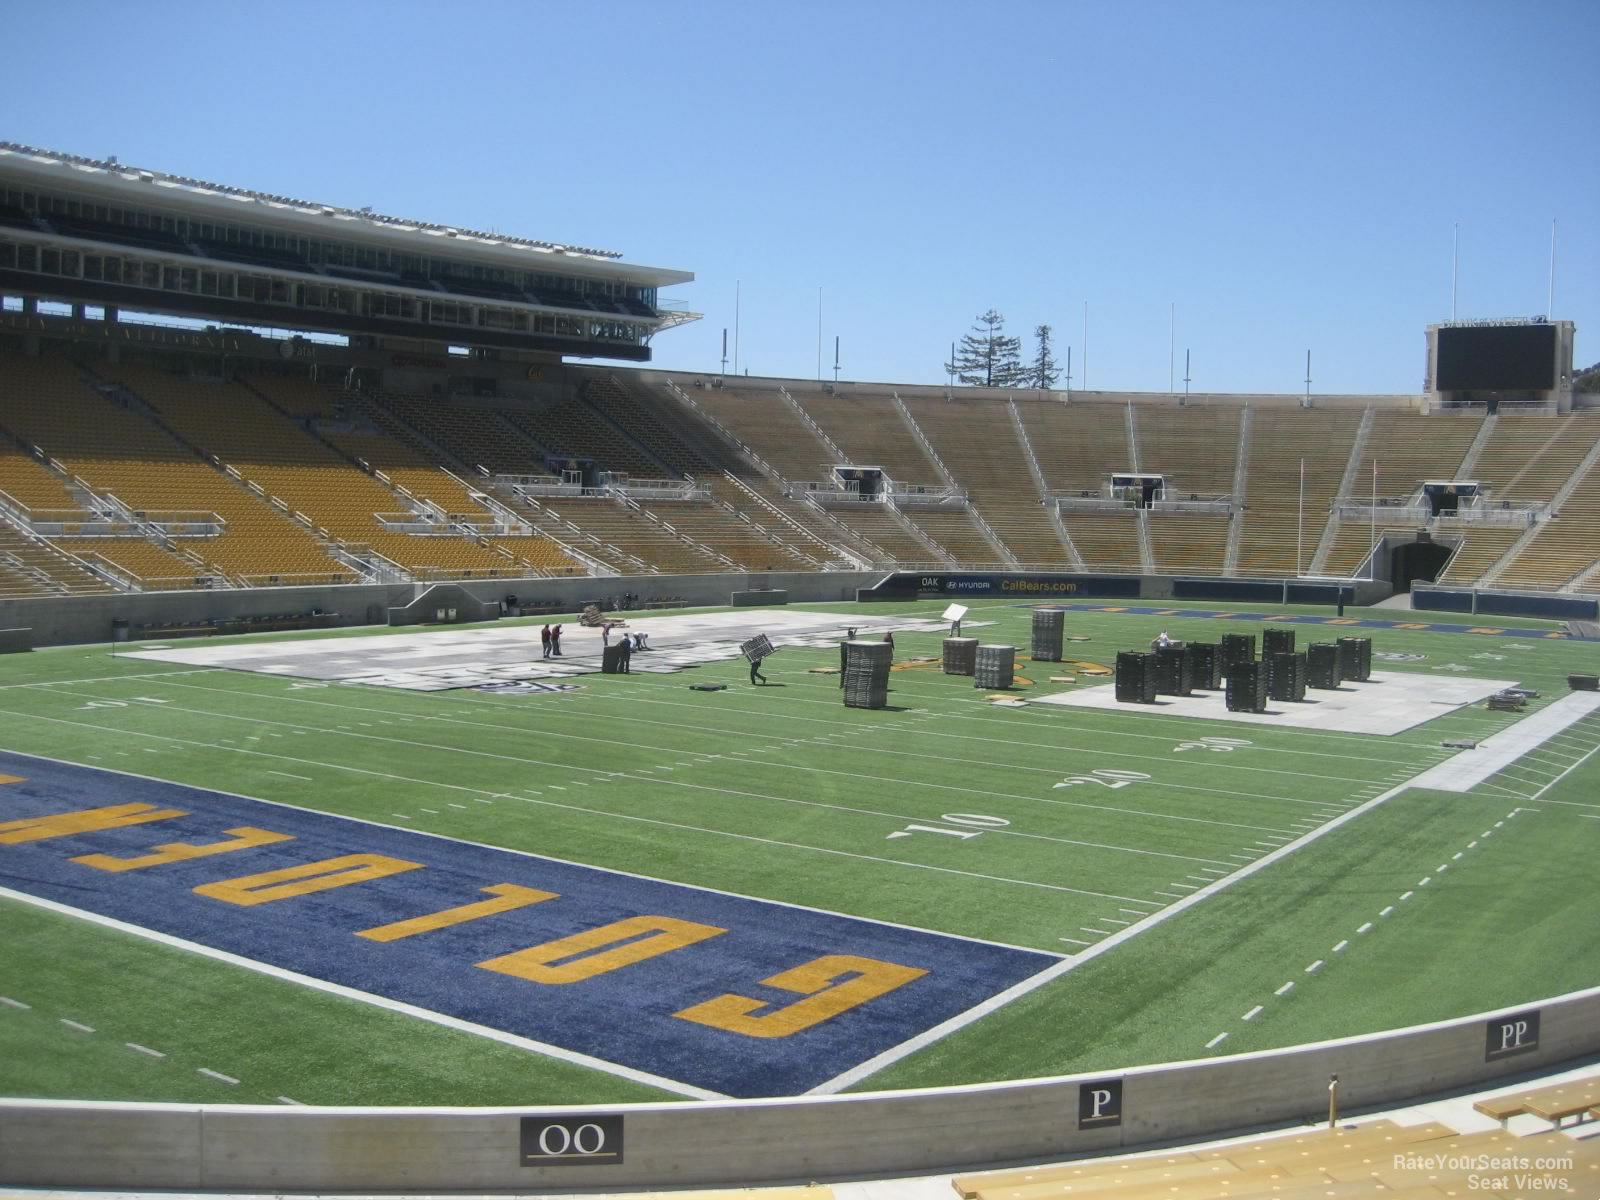 section oo, row 22 seat view  - memorial stadium (cal)